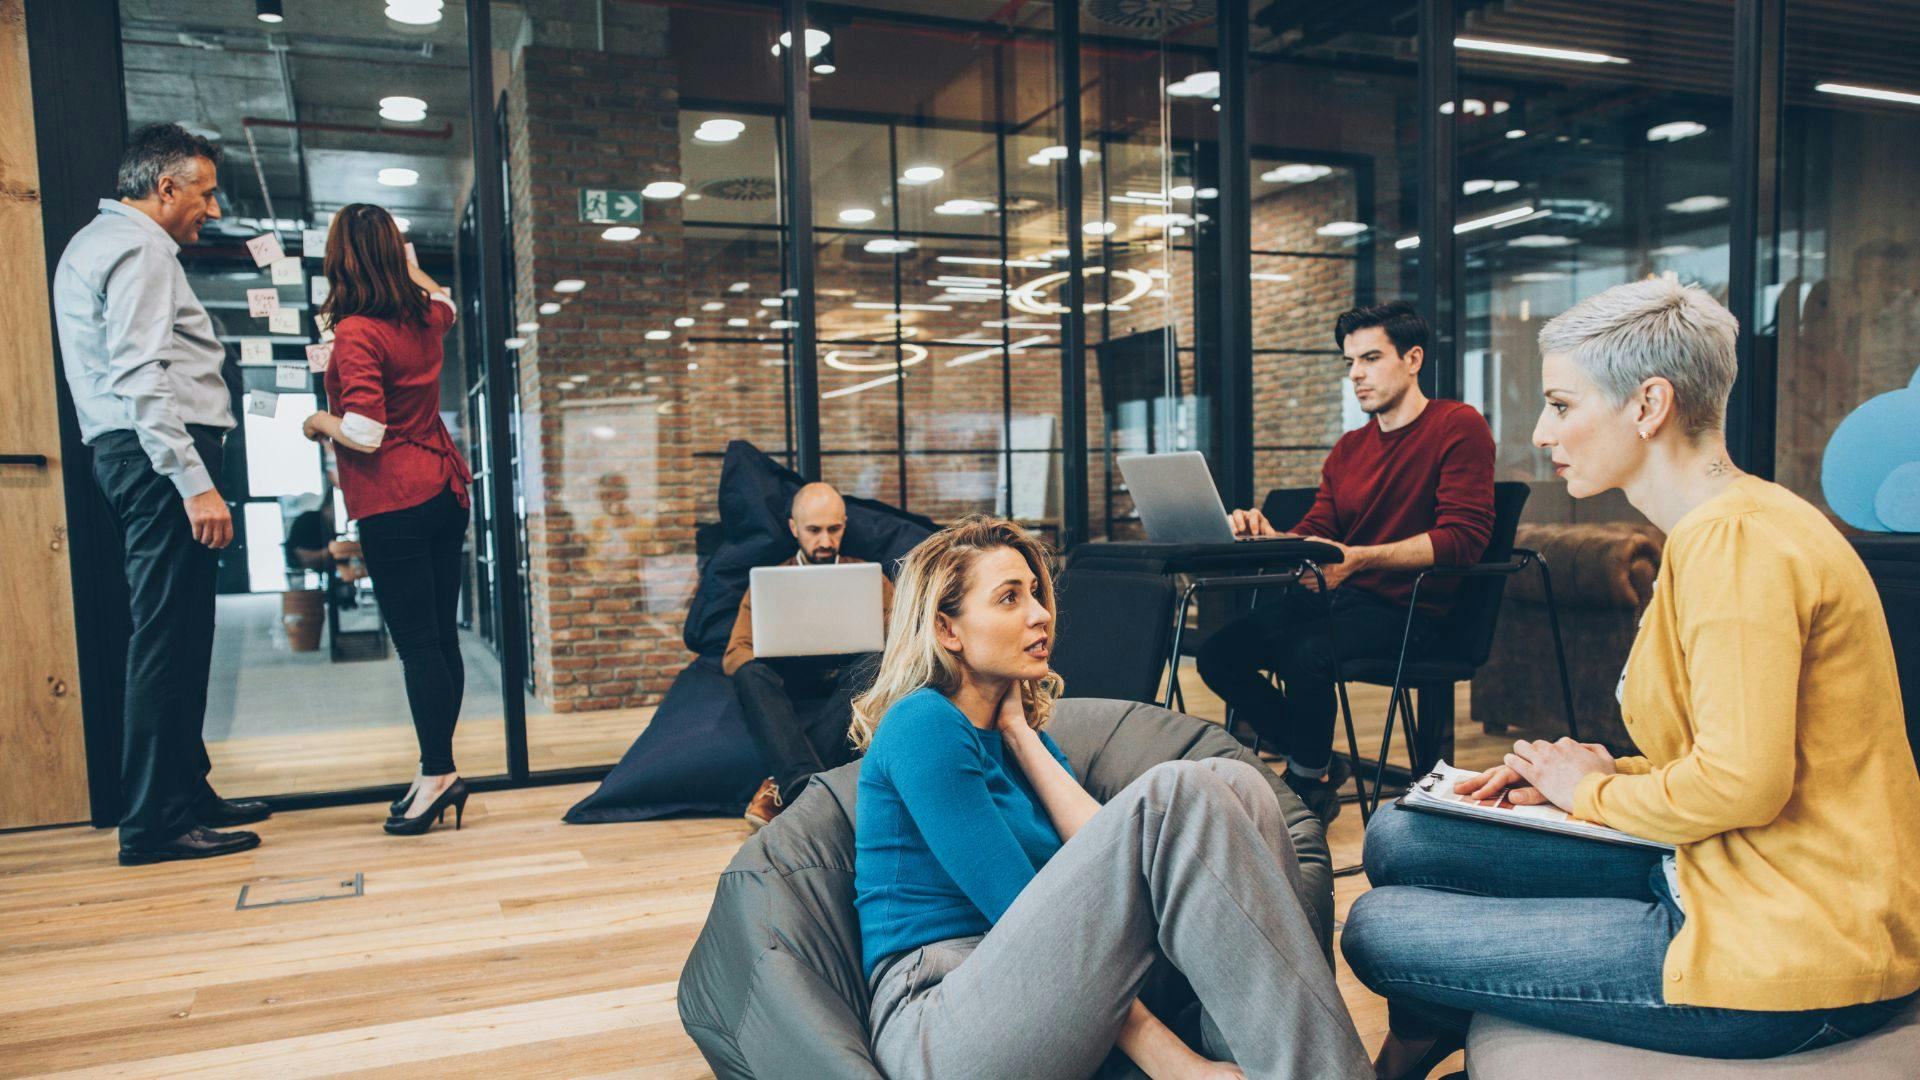 Group of individuals relaxing on bean bags in an office.